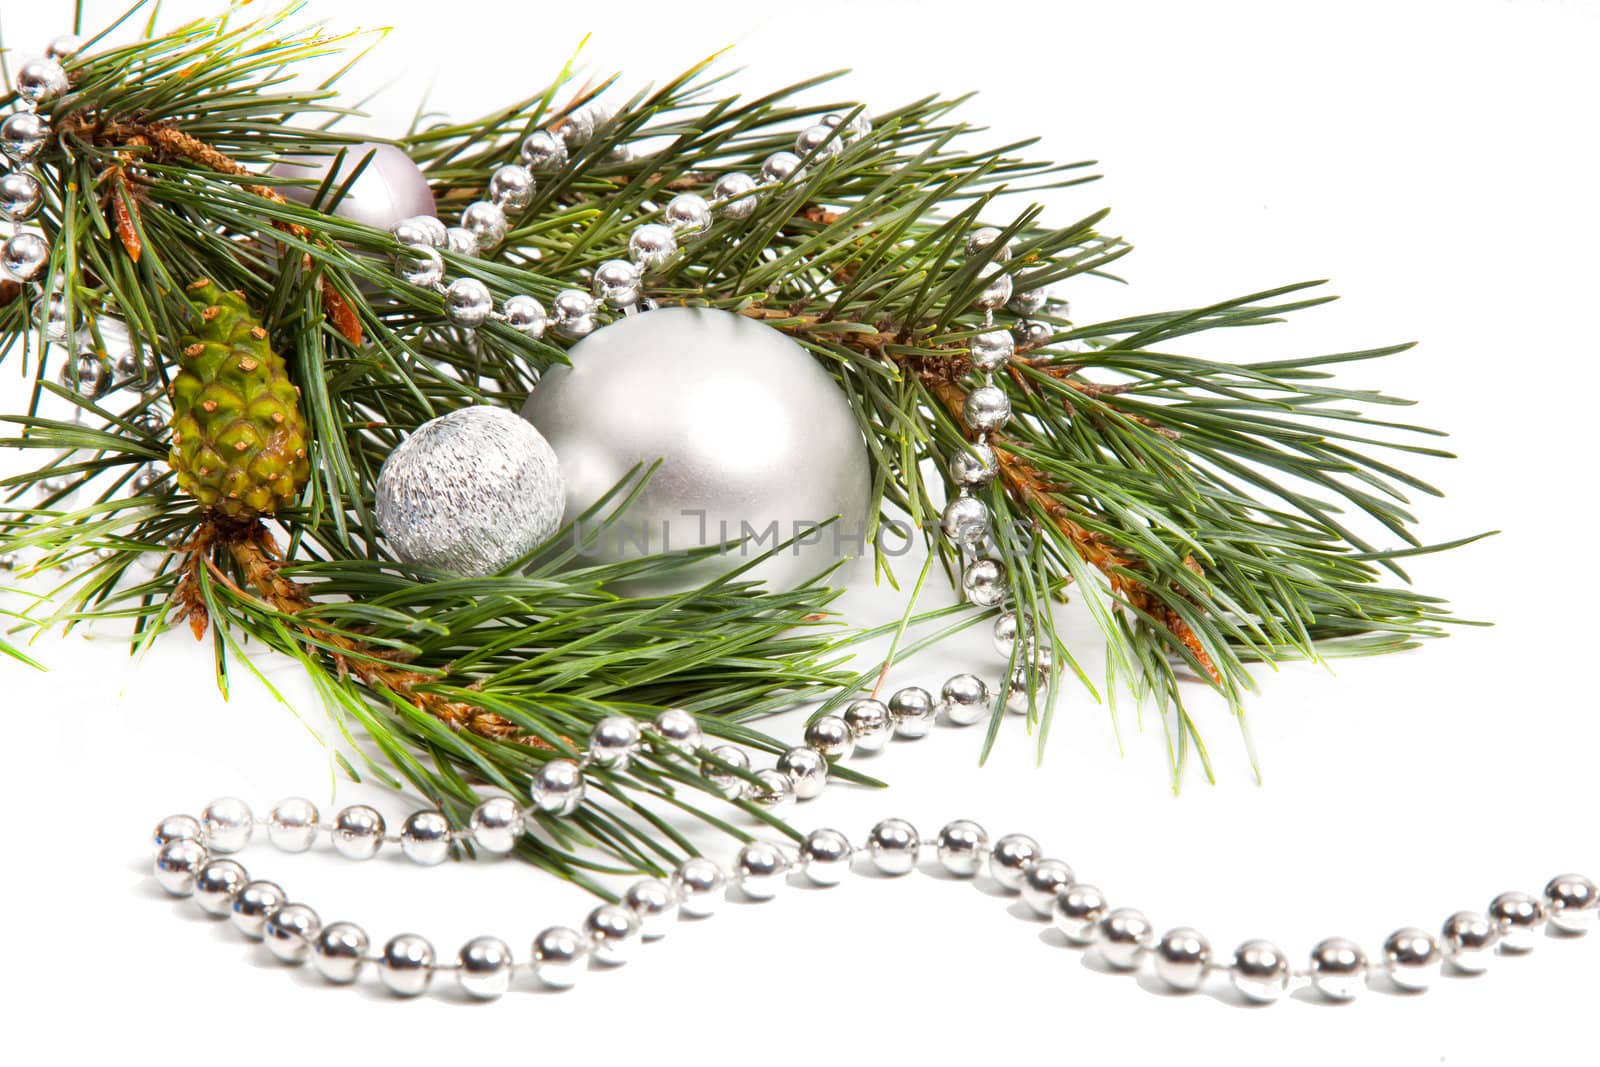 Green spruce twig with Christmas balls and decoration by RawGroup